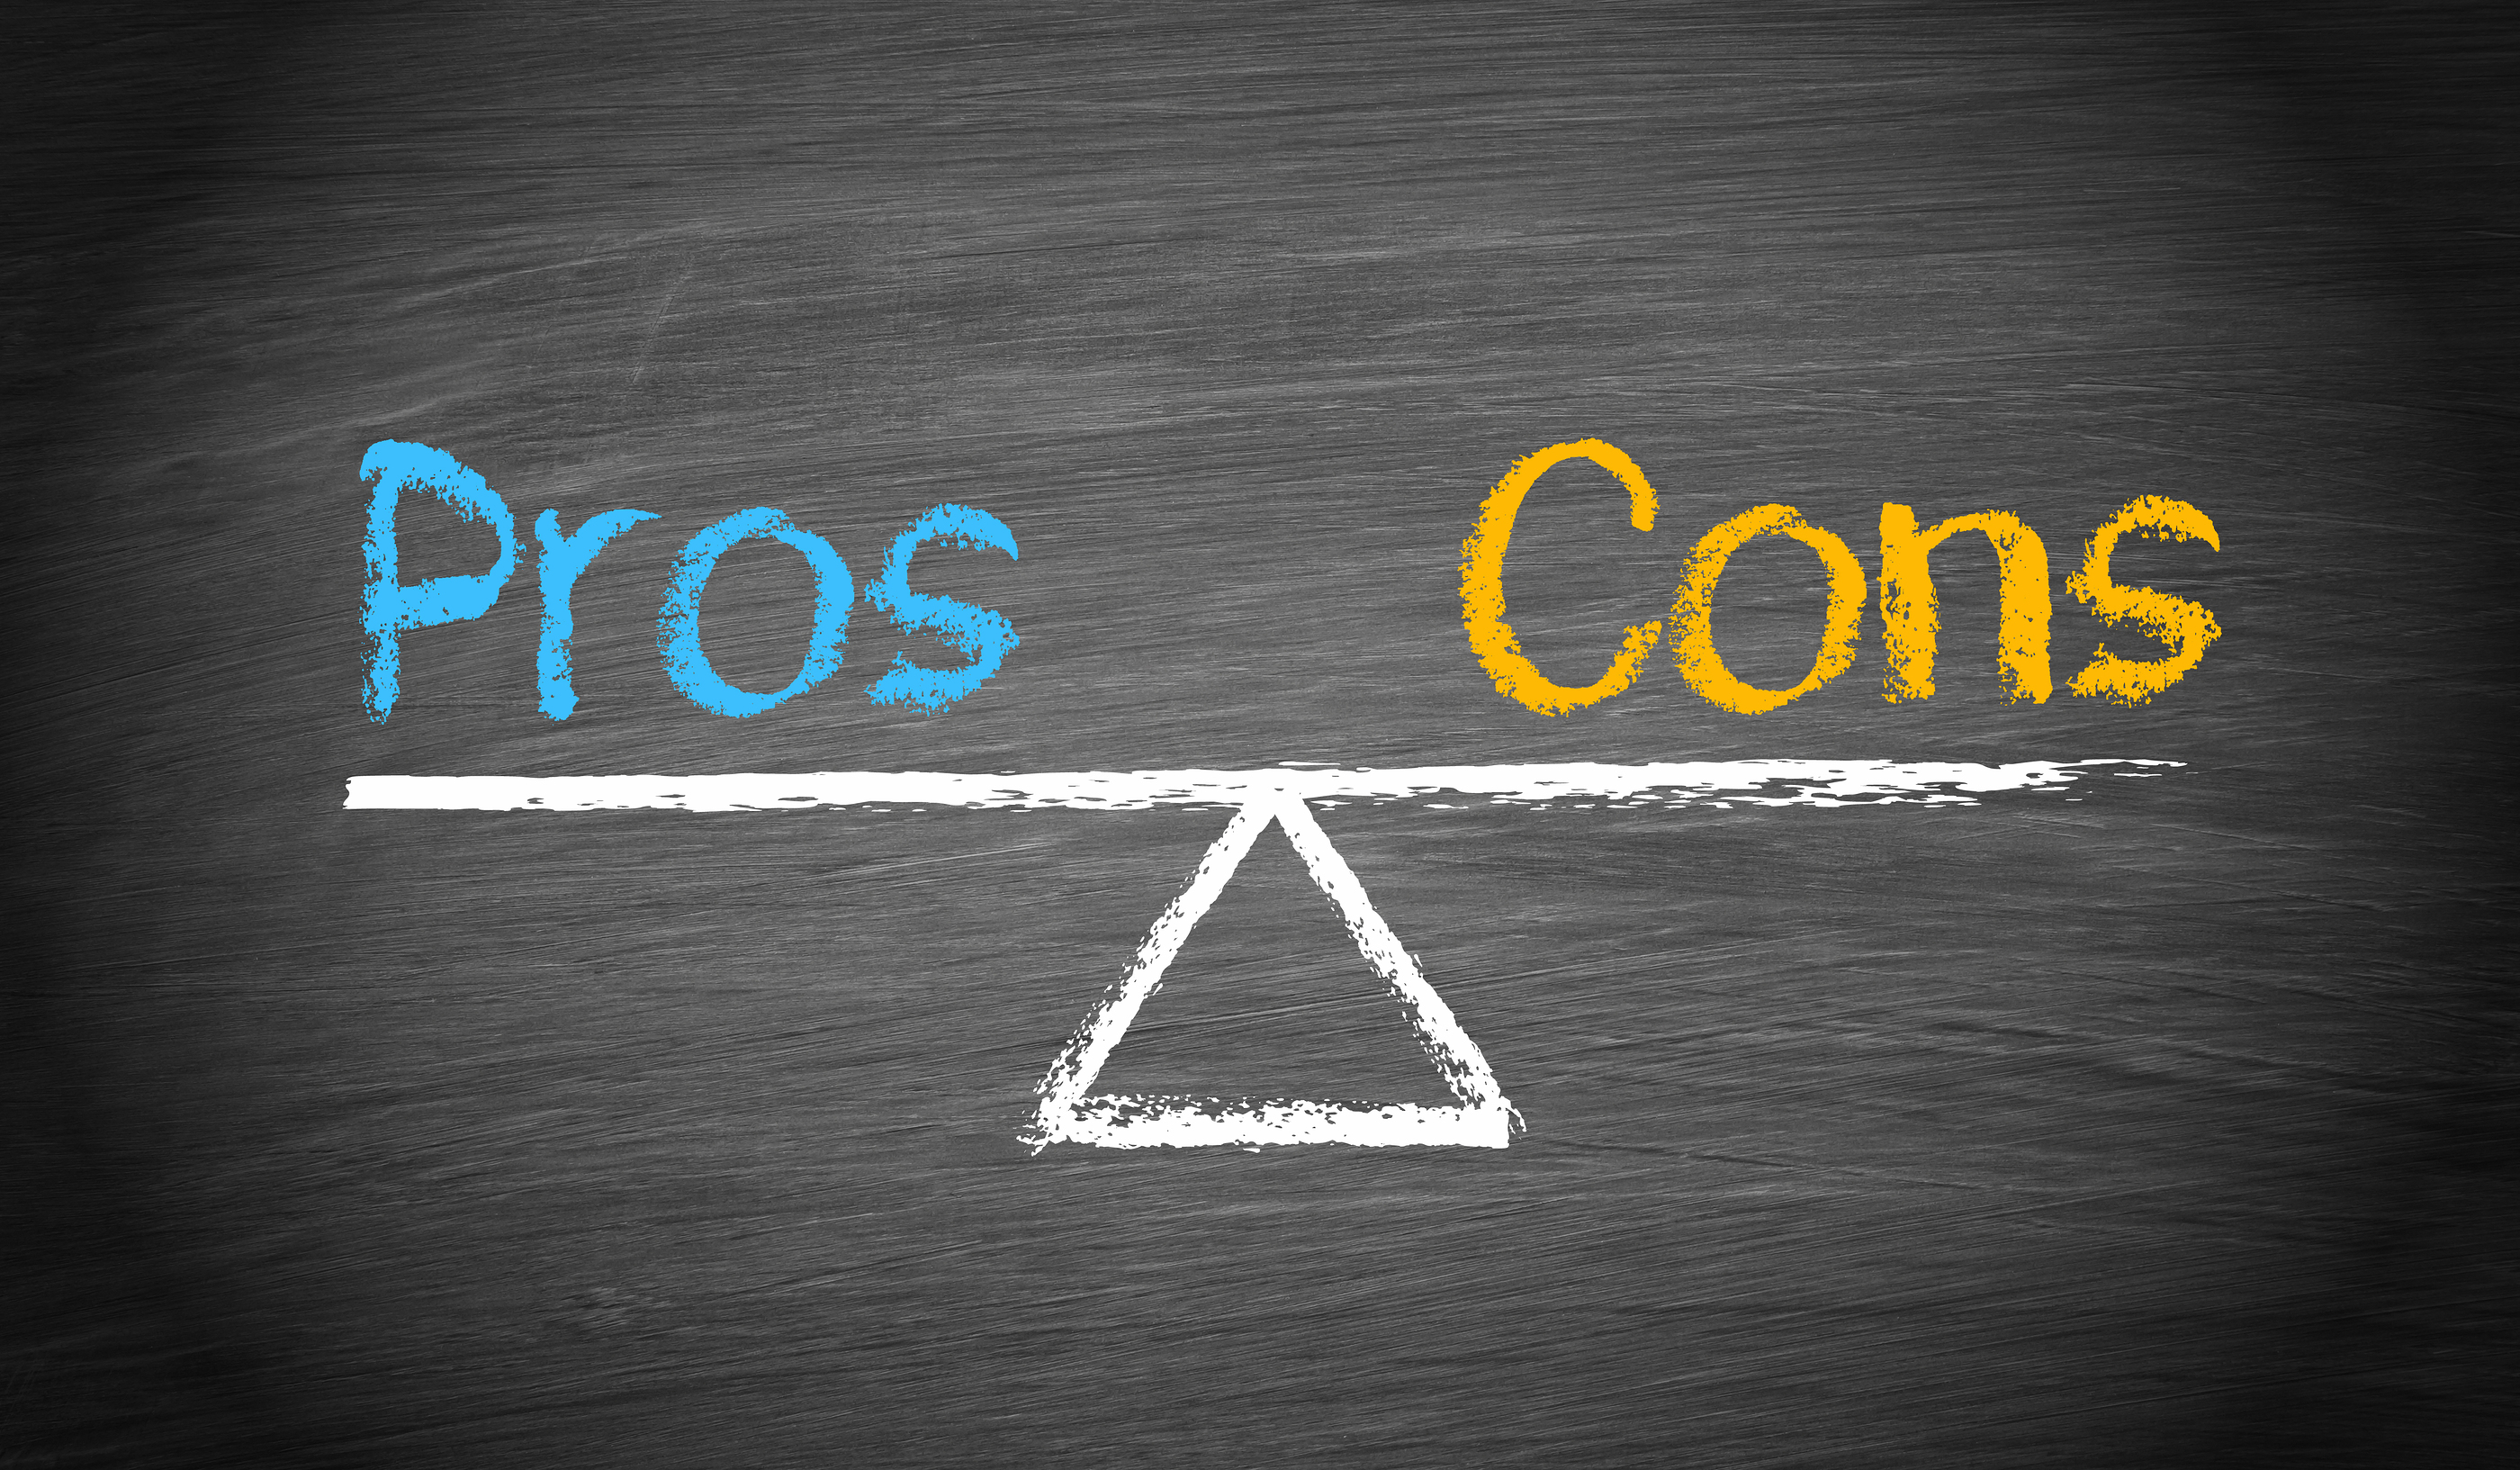 Pros and Cons image